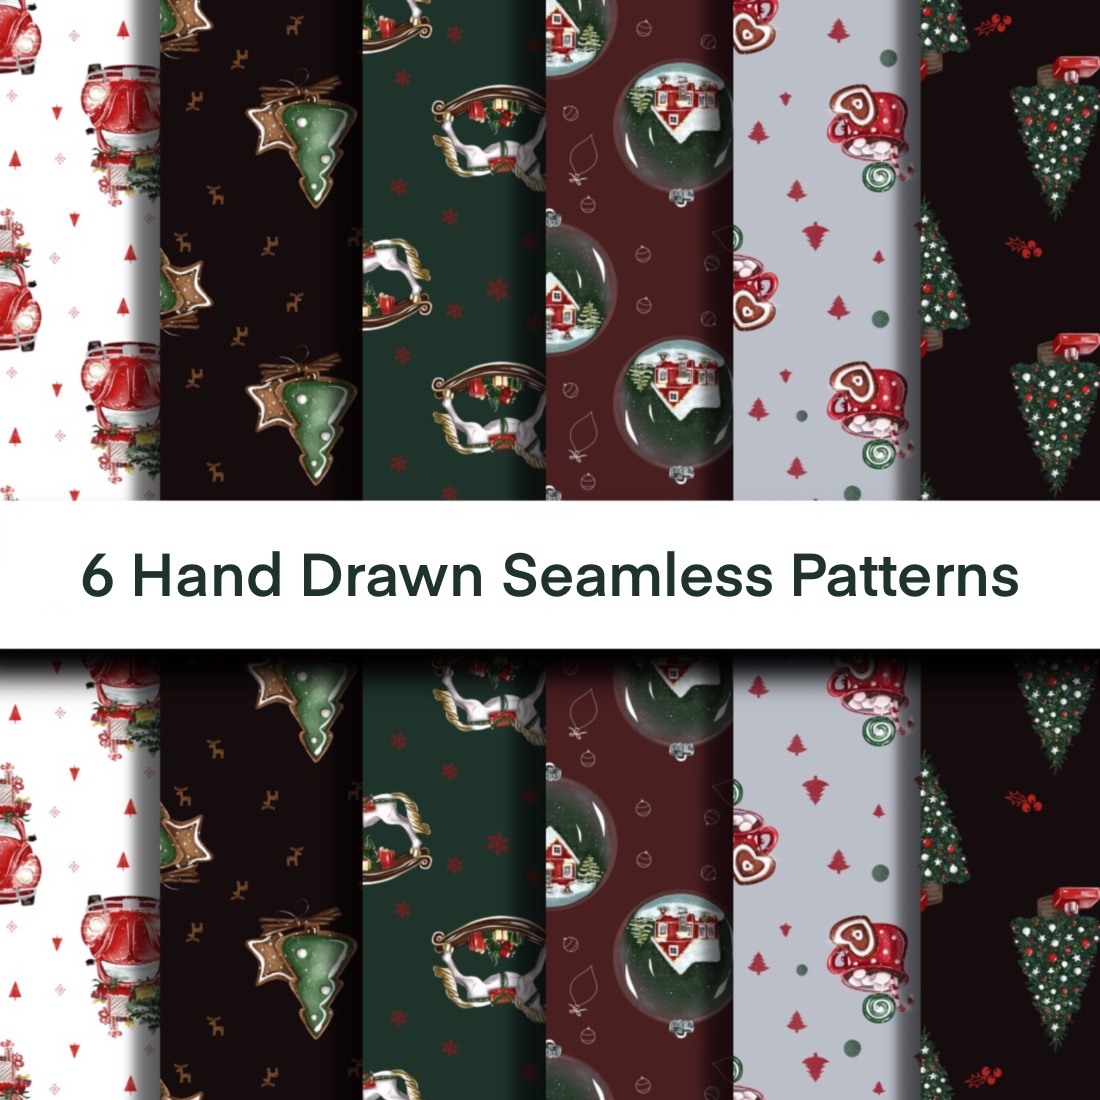 Christmas Patterns cover image.